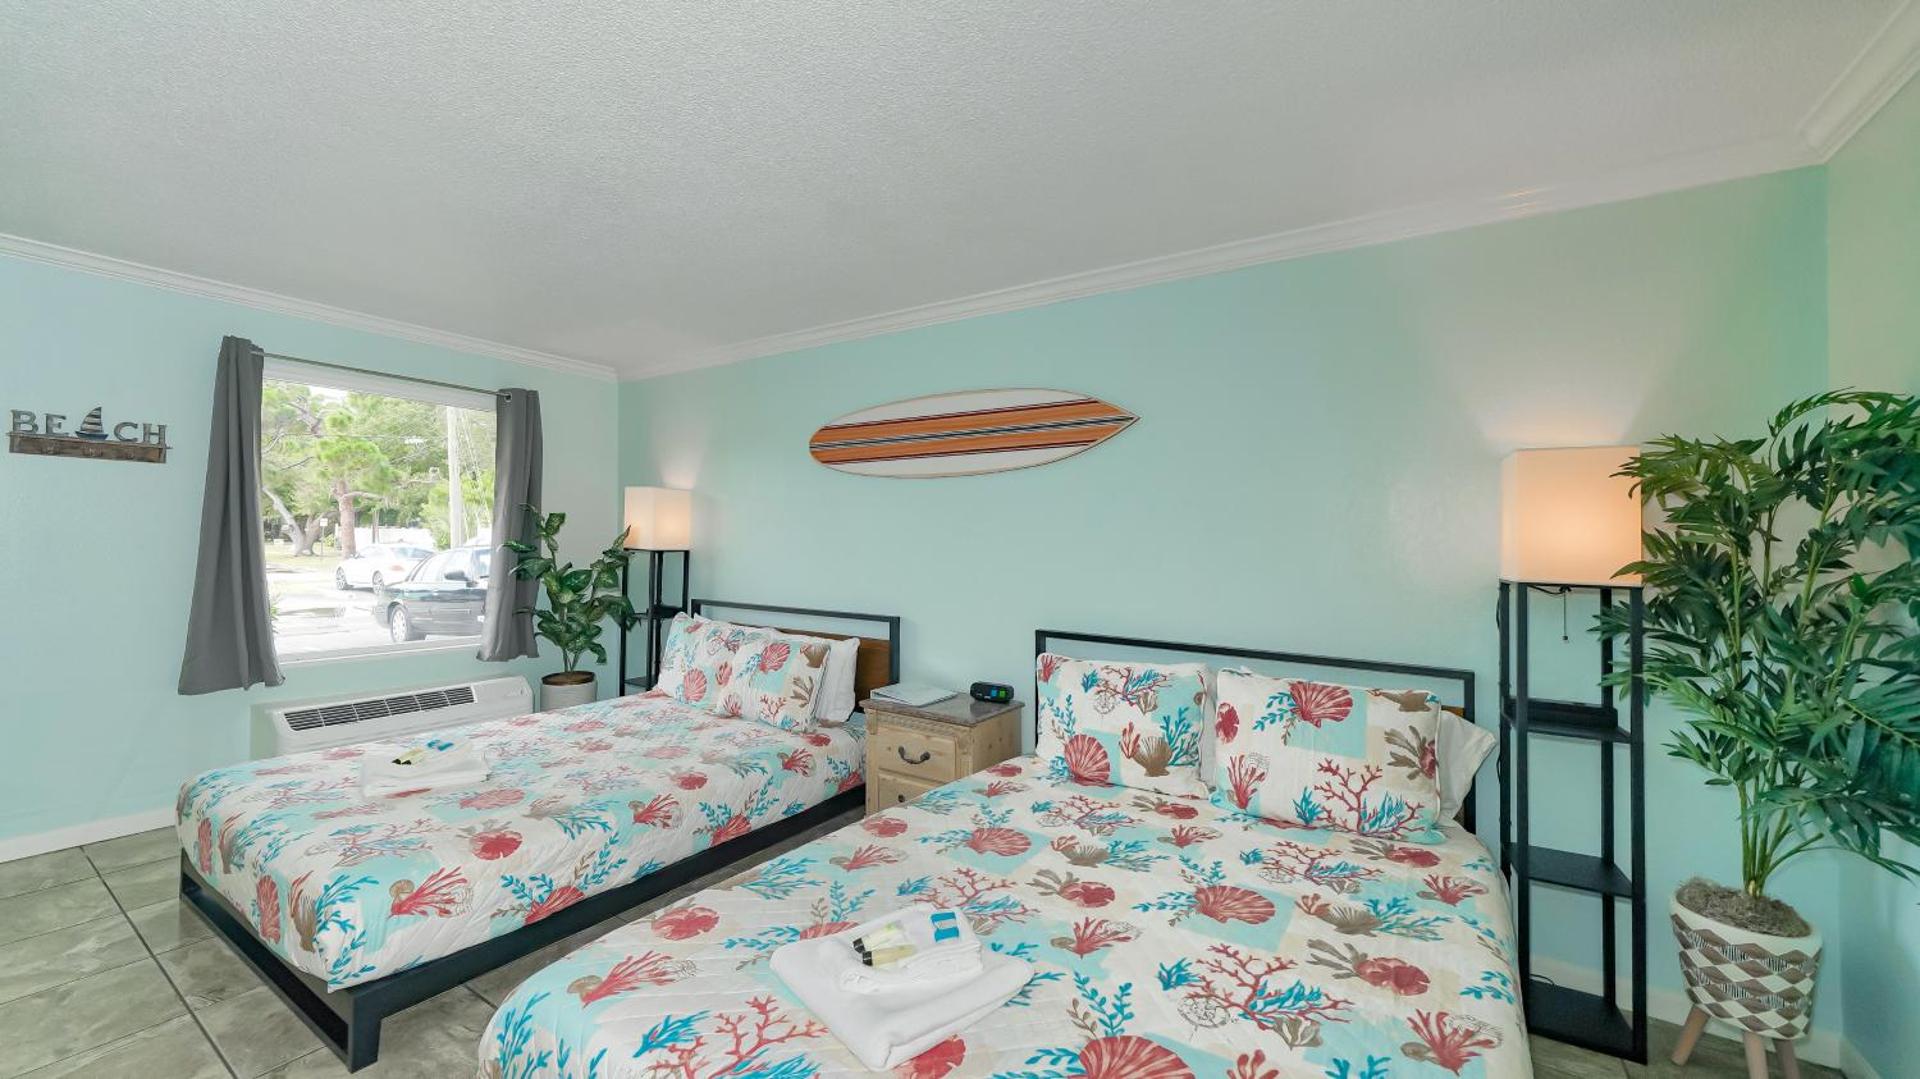 Heated Pool, Huge TV, Waterfront Tiki Bar & Grill, Close to Beaches